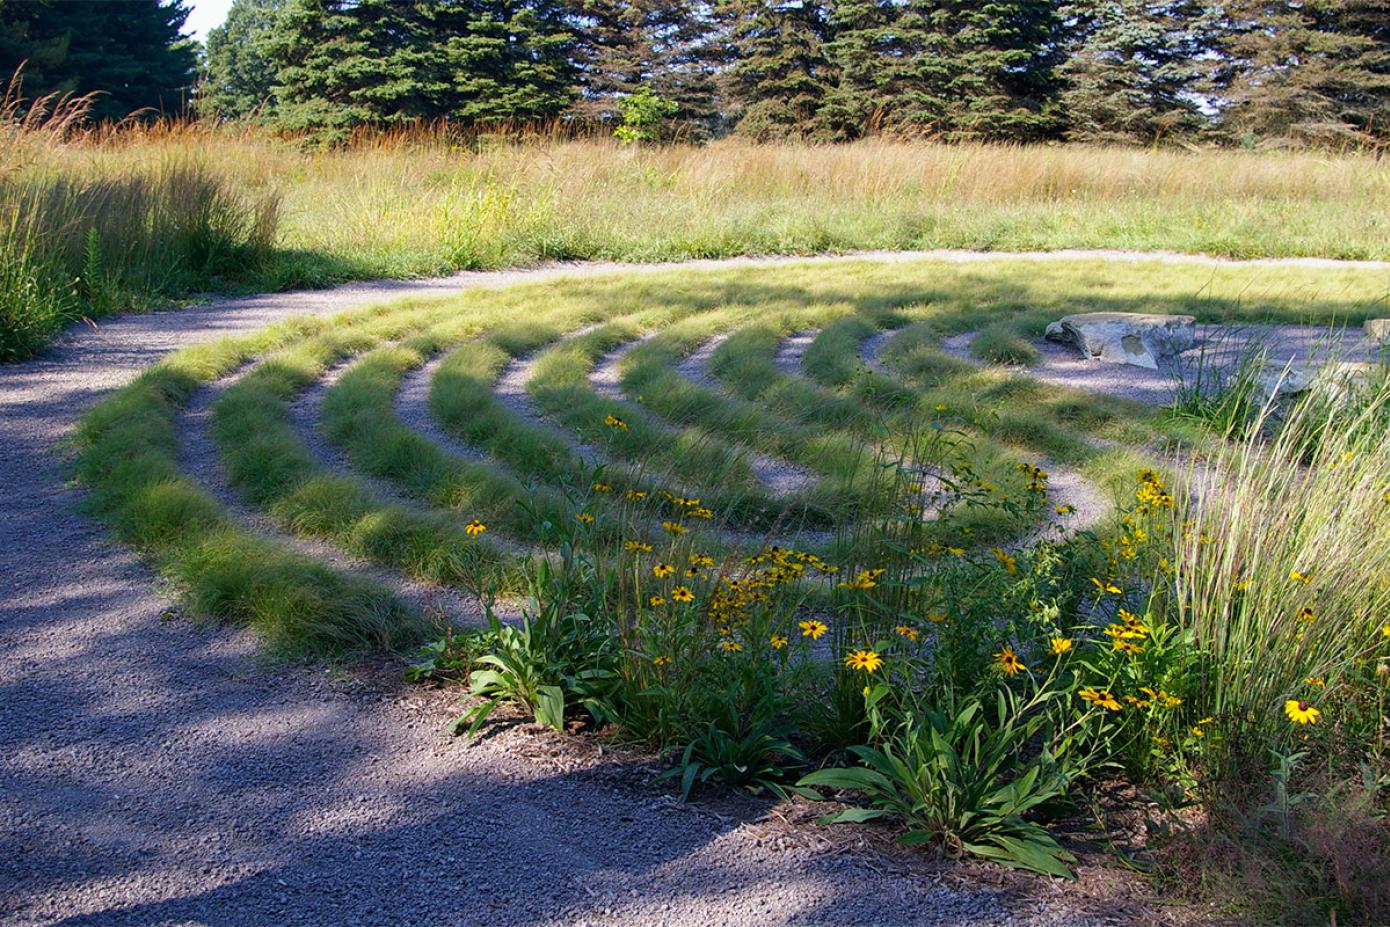 Flowers in front of the Labyrinth